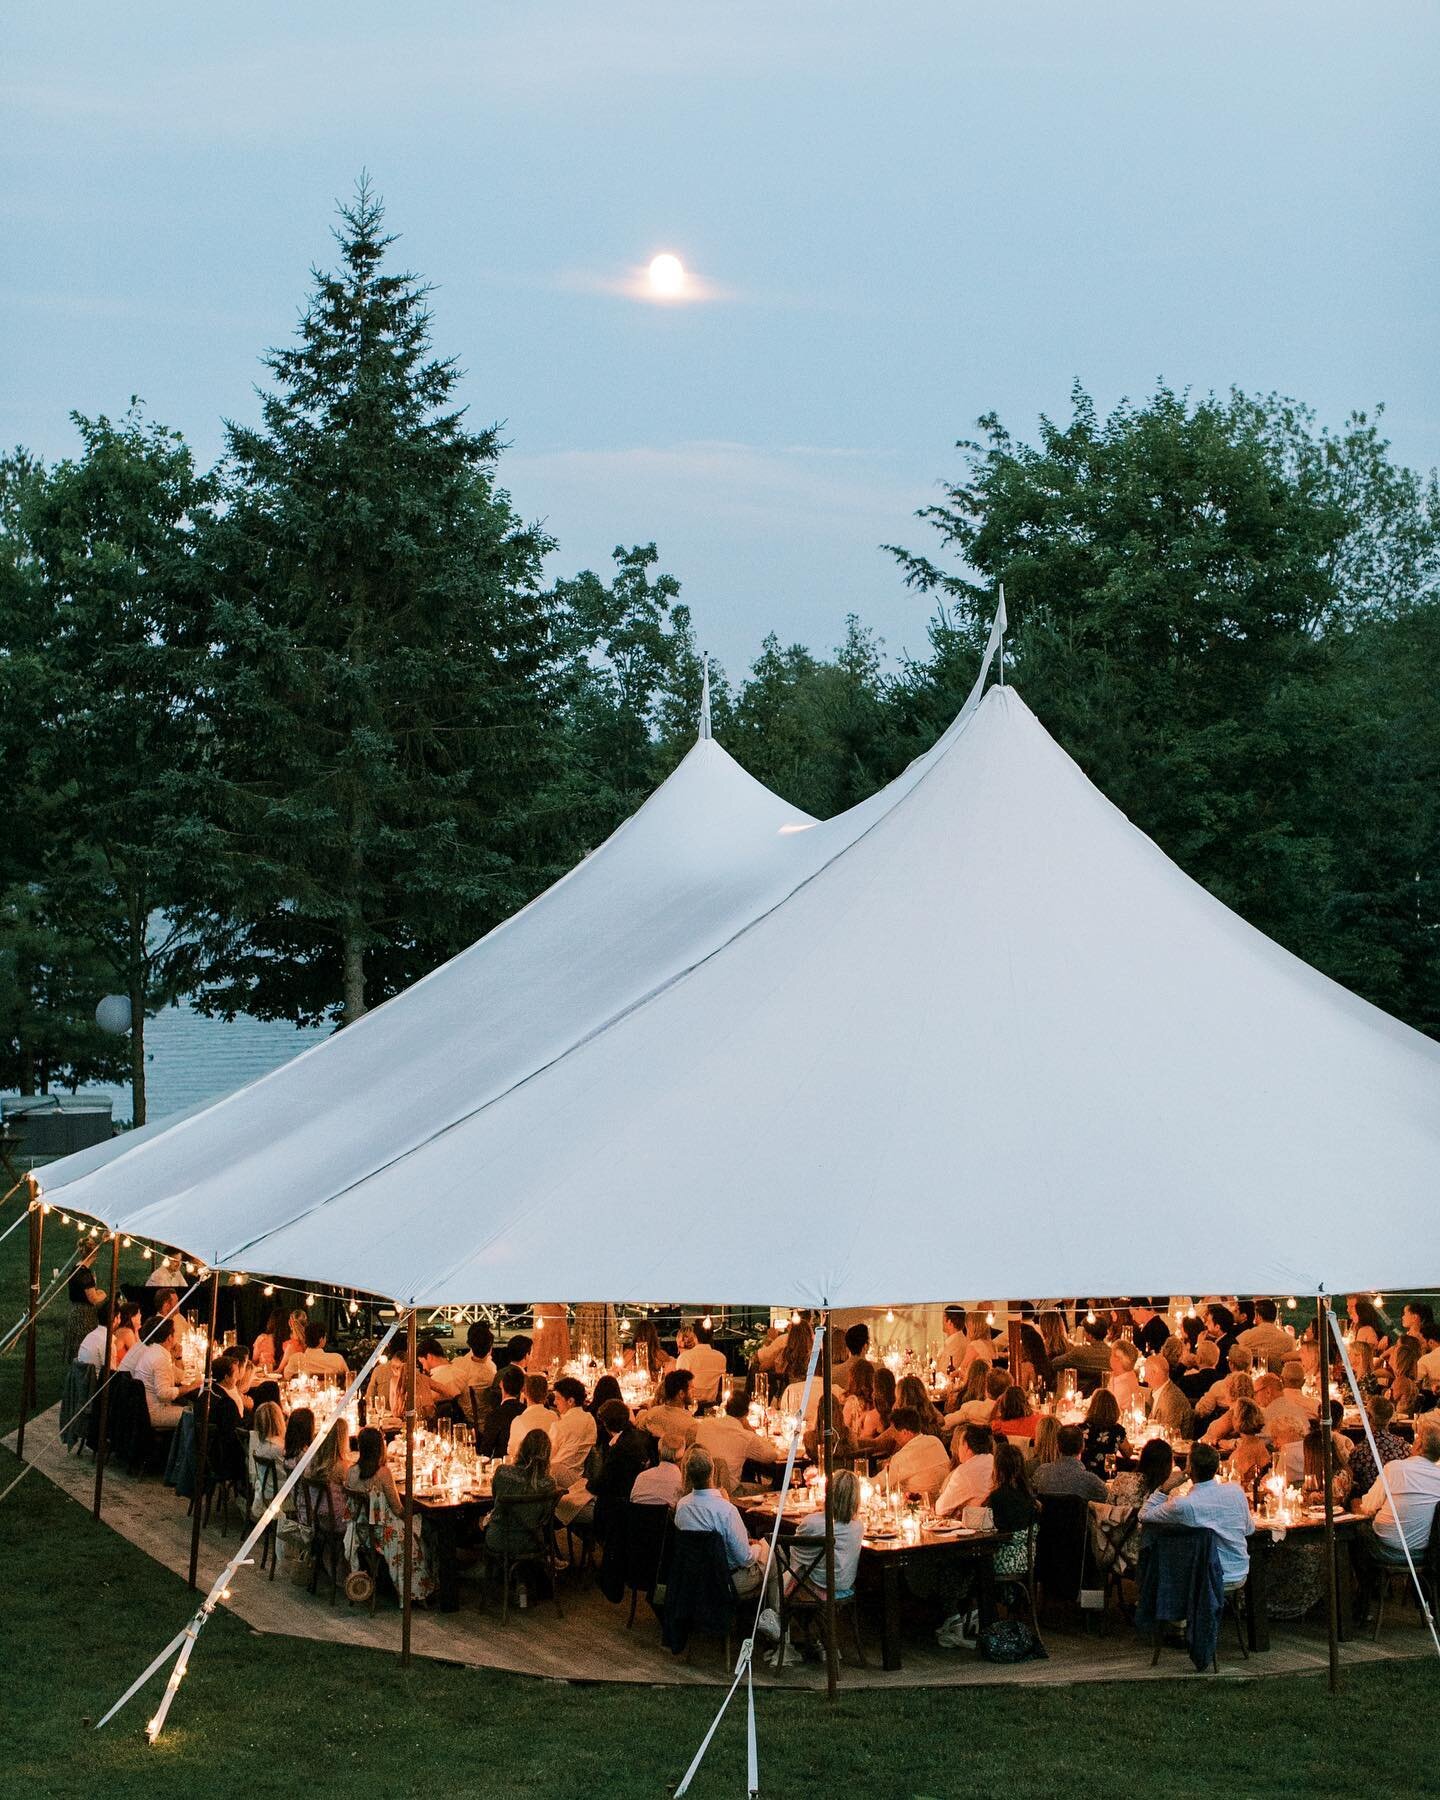 Let&rsquo;s talk about tented weddings for a sec. Many couples who decide to plan their weddings at their home or cottage don&rsquo;t realize how much work it is or even what it entails (how could you if you haven&rsquo;t done it before!) so it can b